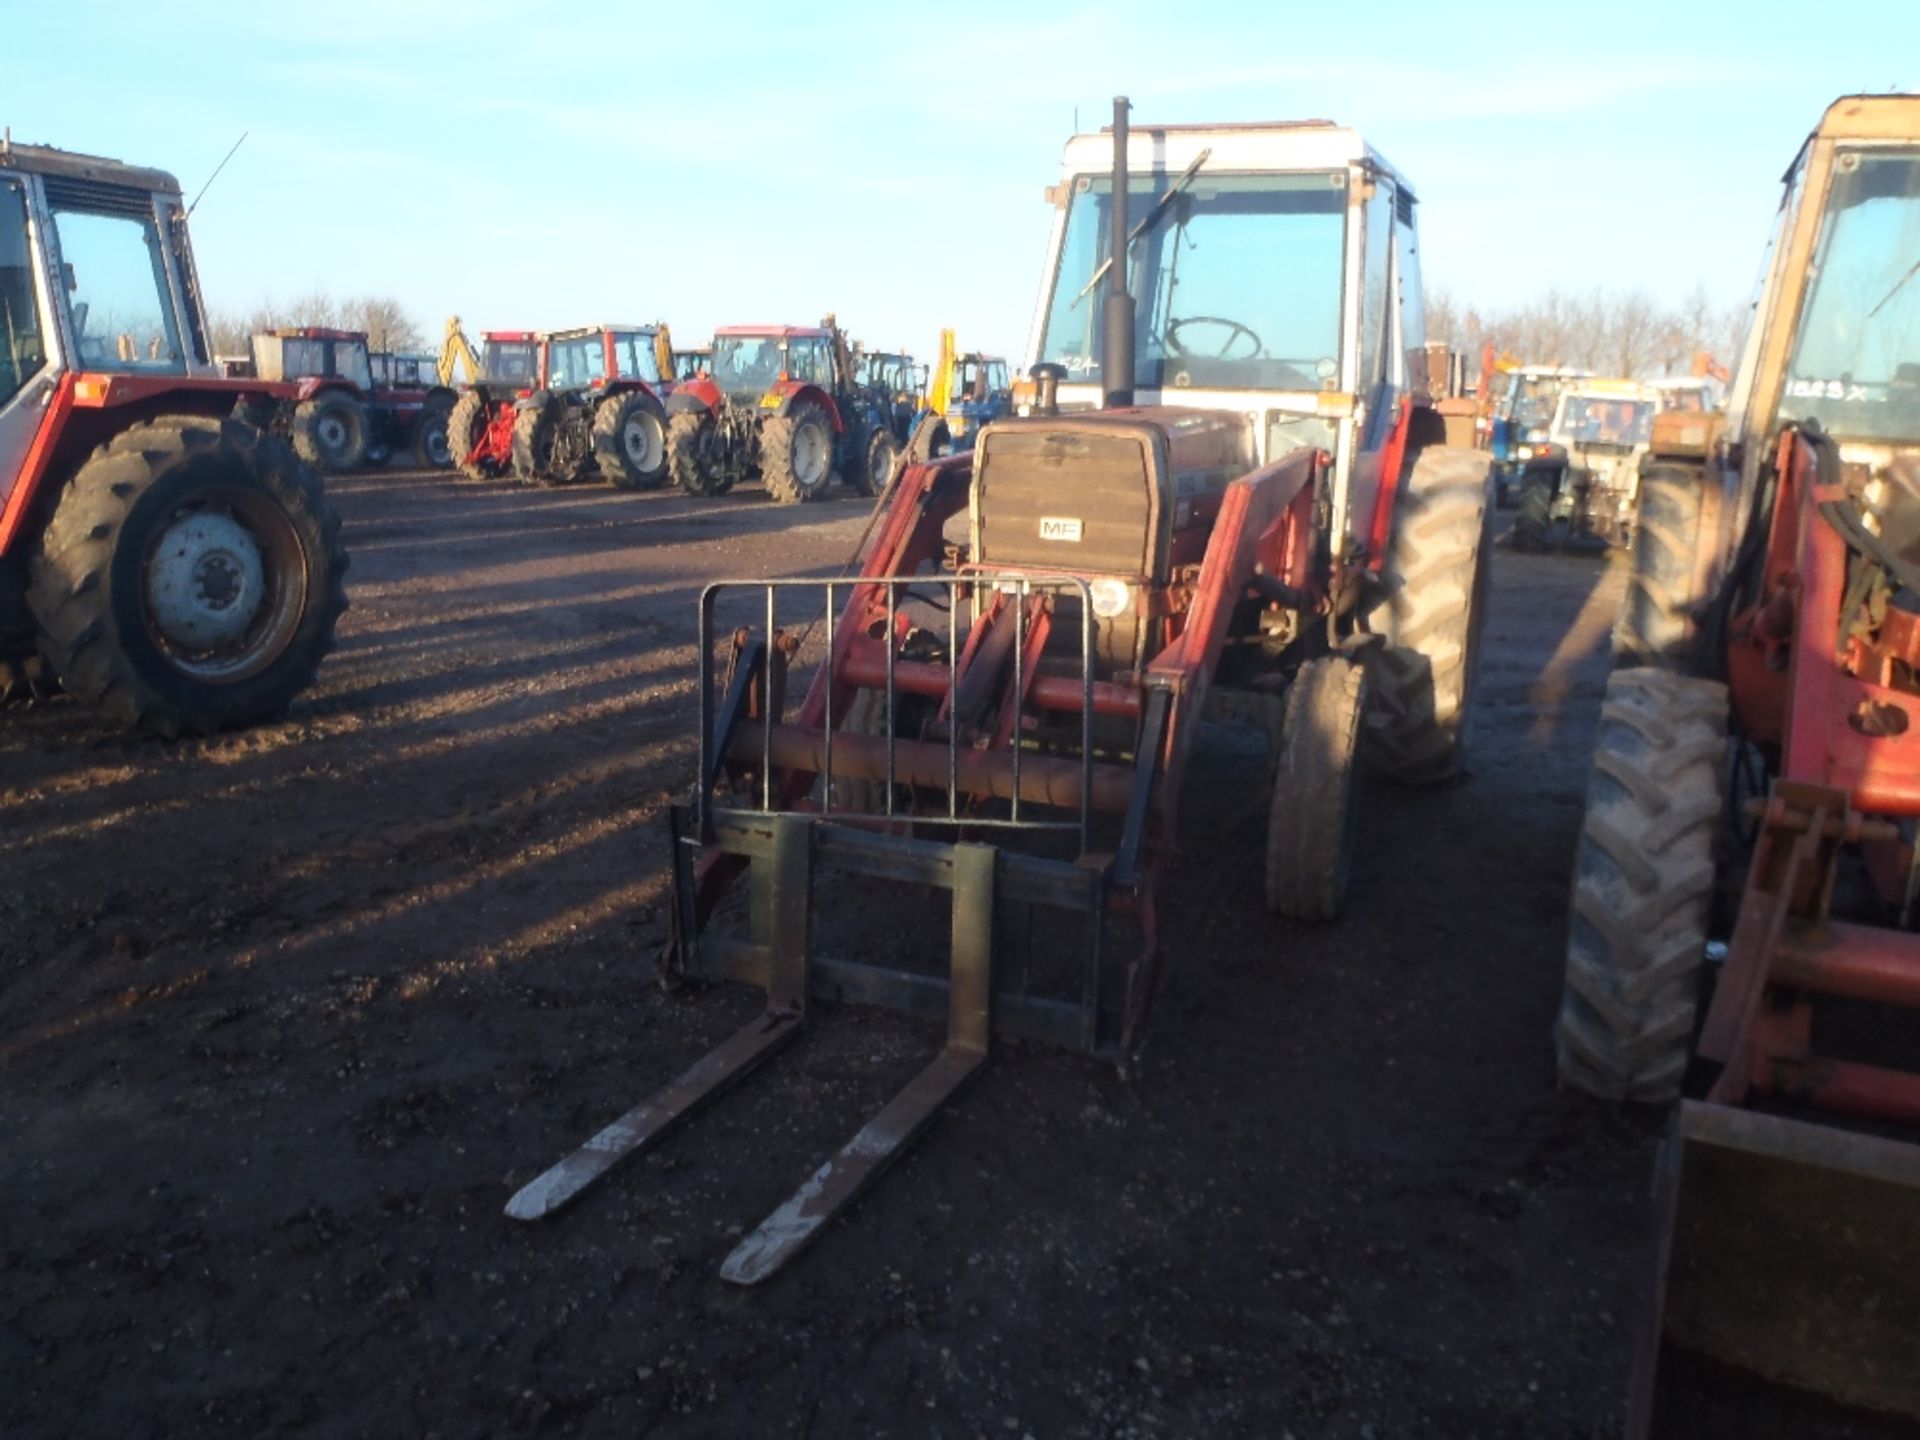 Massey Ferguson 690 2wd Tractor with Loader & Forks. 2550 Hrs. Reg No. SMO 725Y - Image 2 of 12